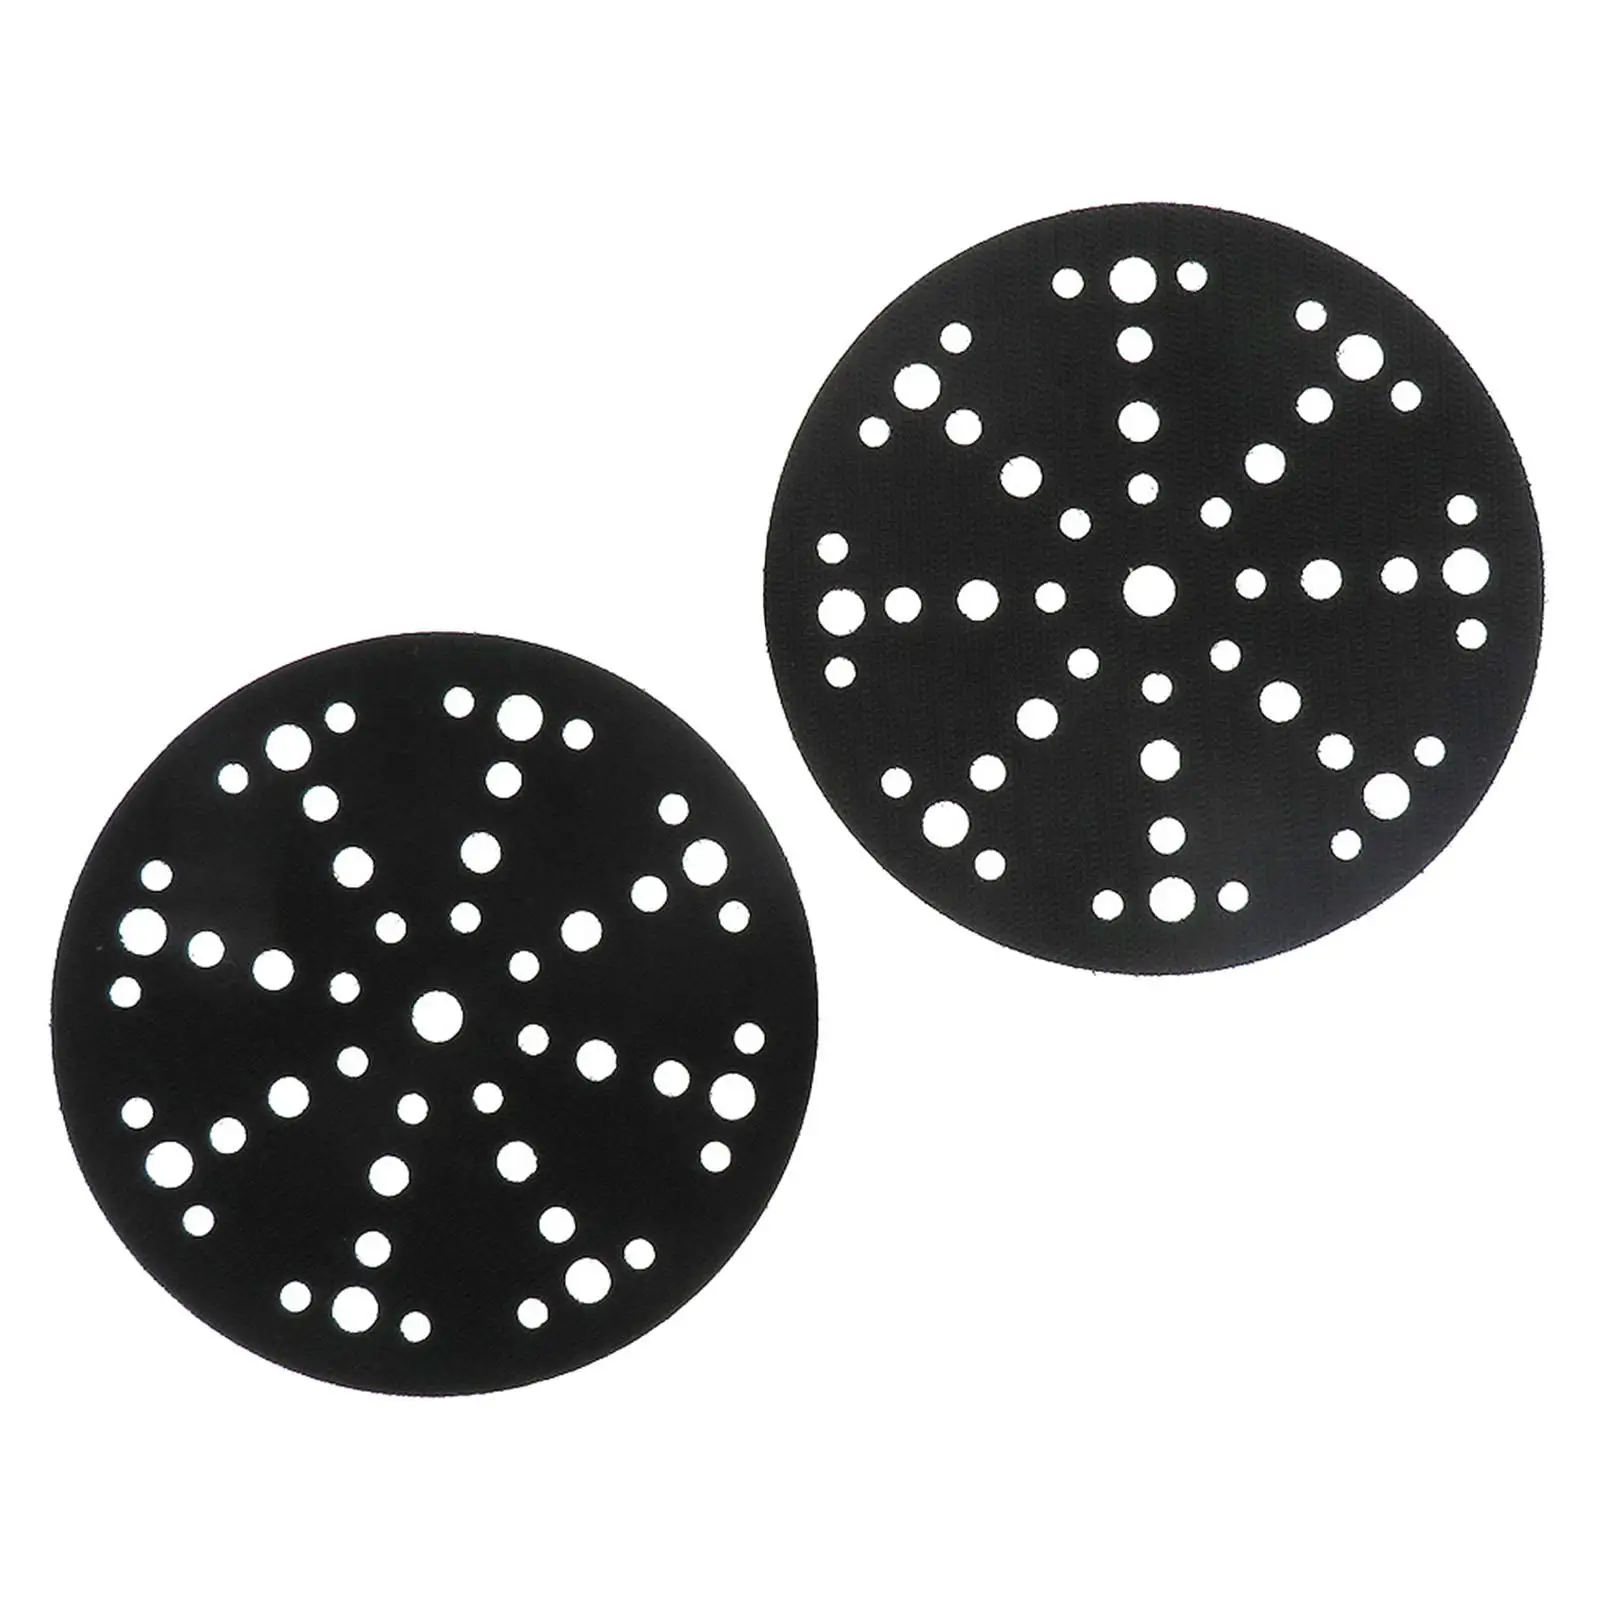 2Pcs Polishing Backing Pads 6in 48 Hole Abrasive Power Tools Abrasive Tools Sander Polisher Tool for Carving Grinder Accessories